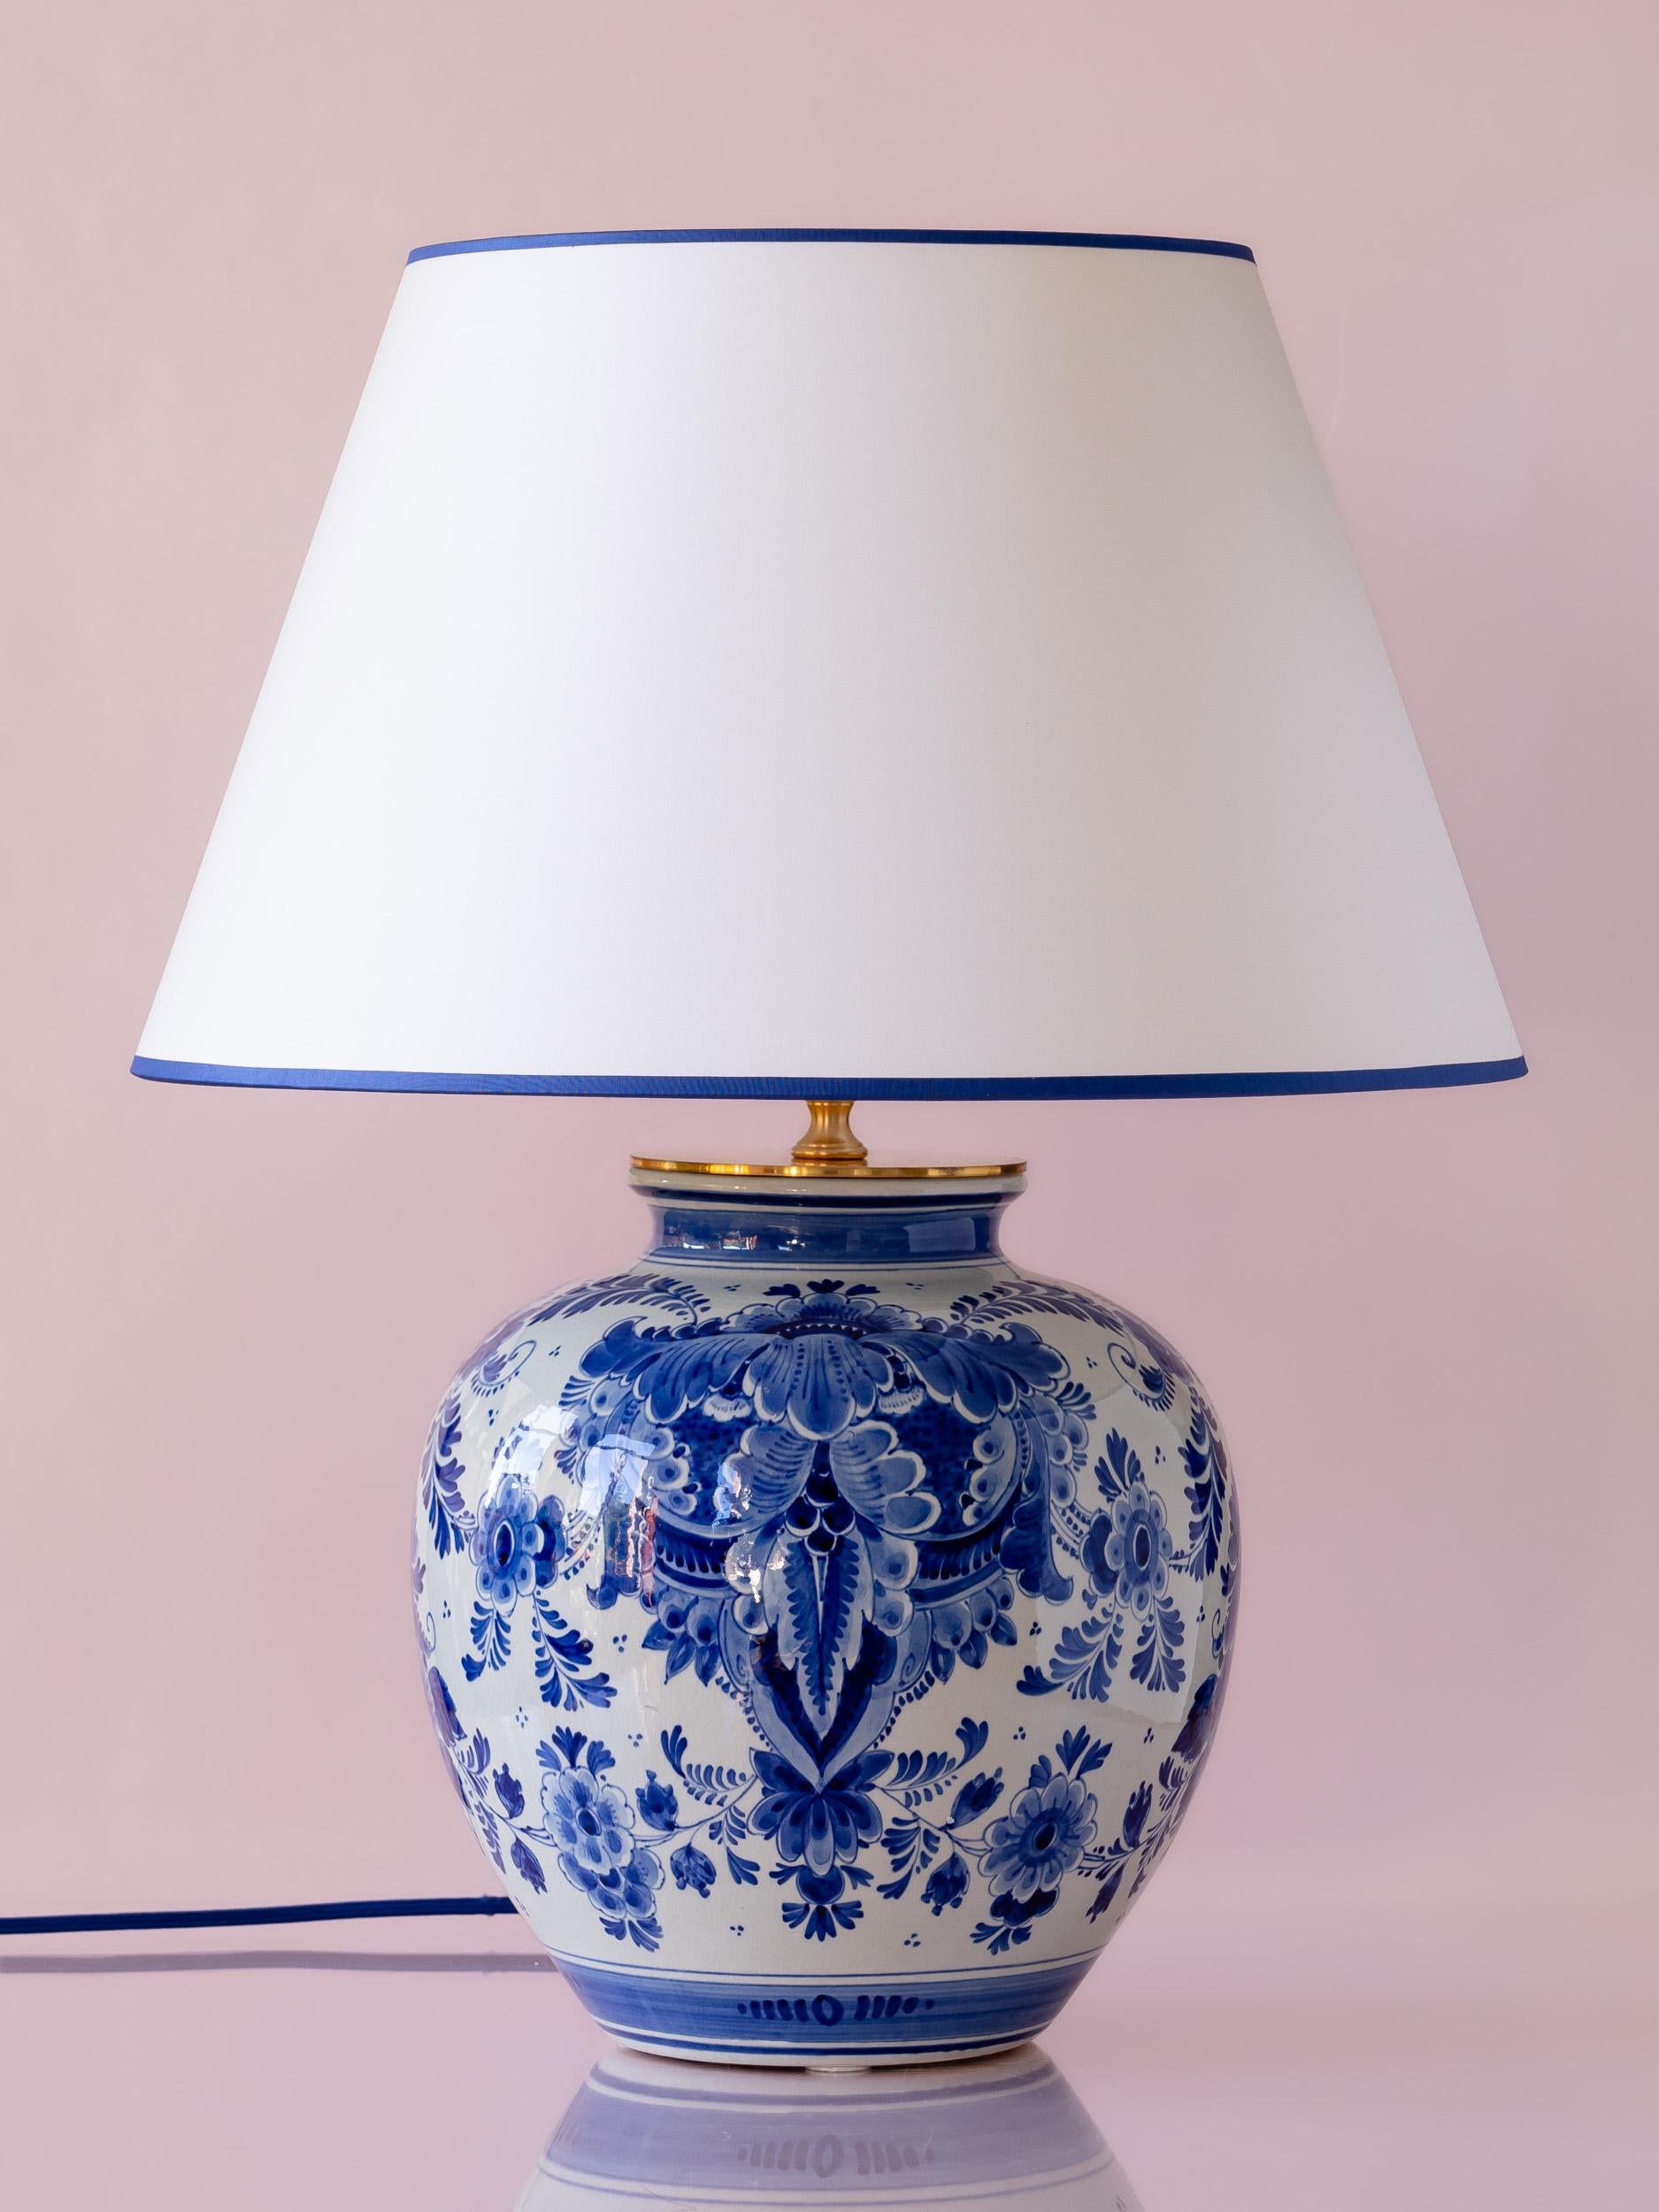 Introducing Mark, inspired by and named after the iconic American interior designer, Mark D. Sikes, renowned for his signature blue and white palettes. This one-of-a-kind table lamp is meticulously handcrafted from a vintage Royal Delft (De